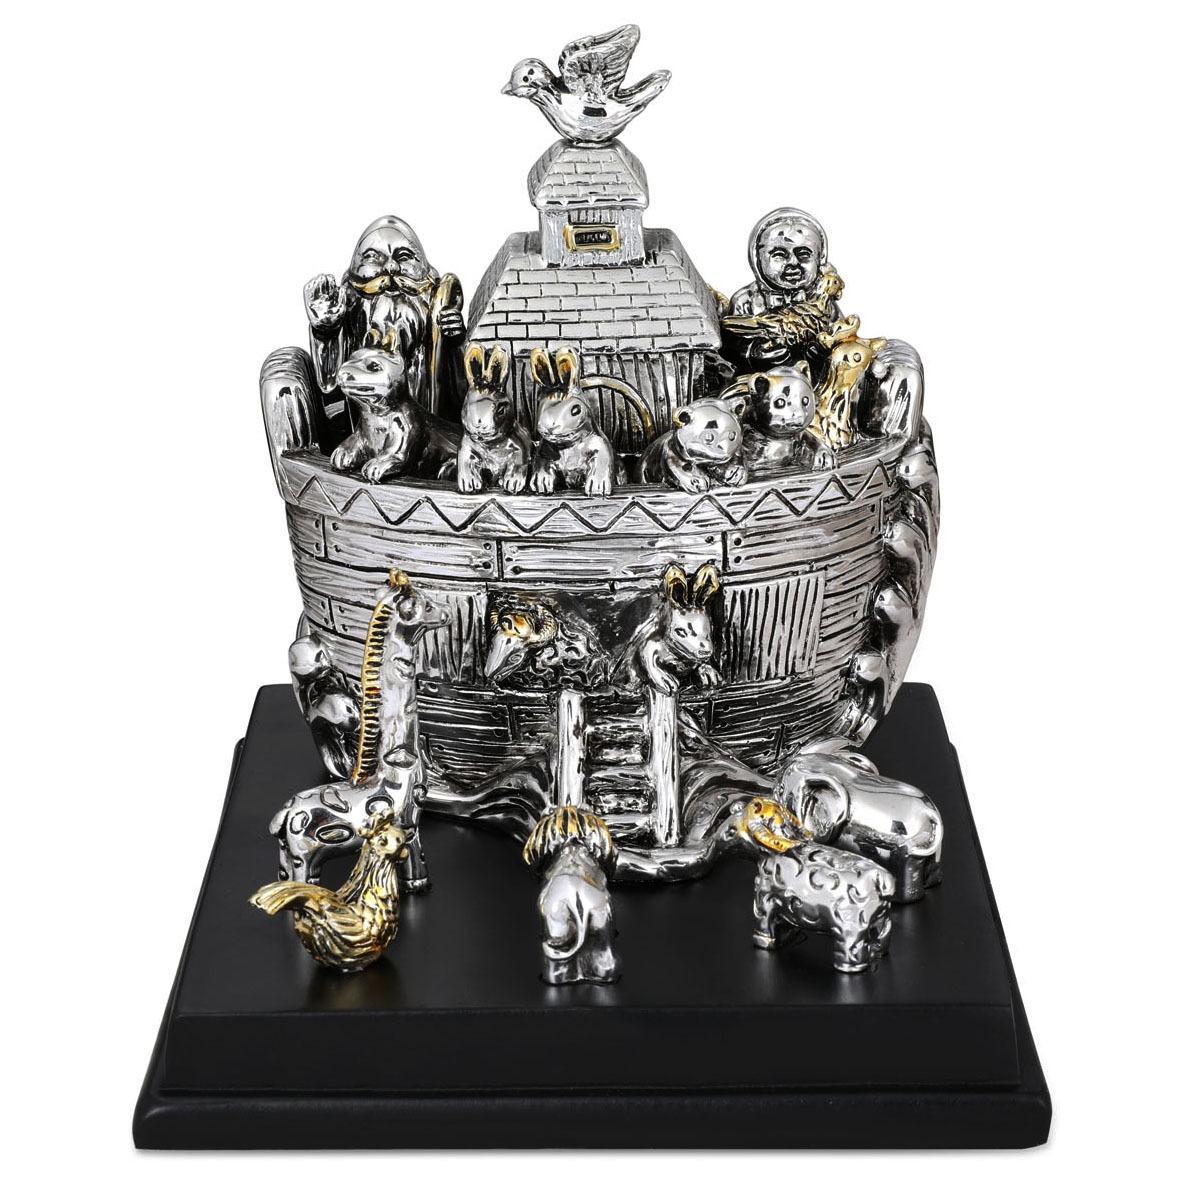 Noah's Ark Large Silver-Plated Miniature  - 1